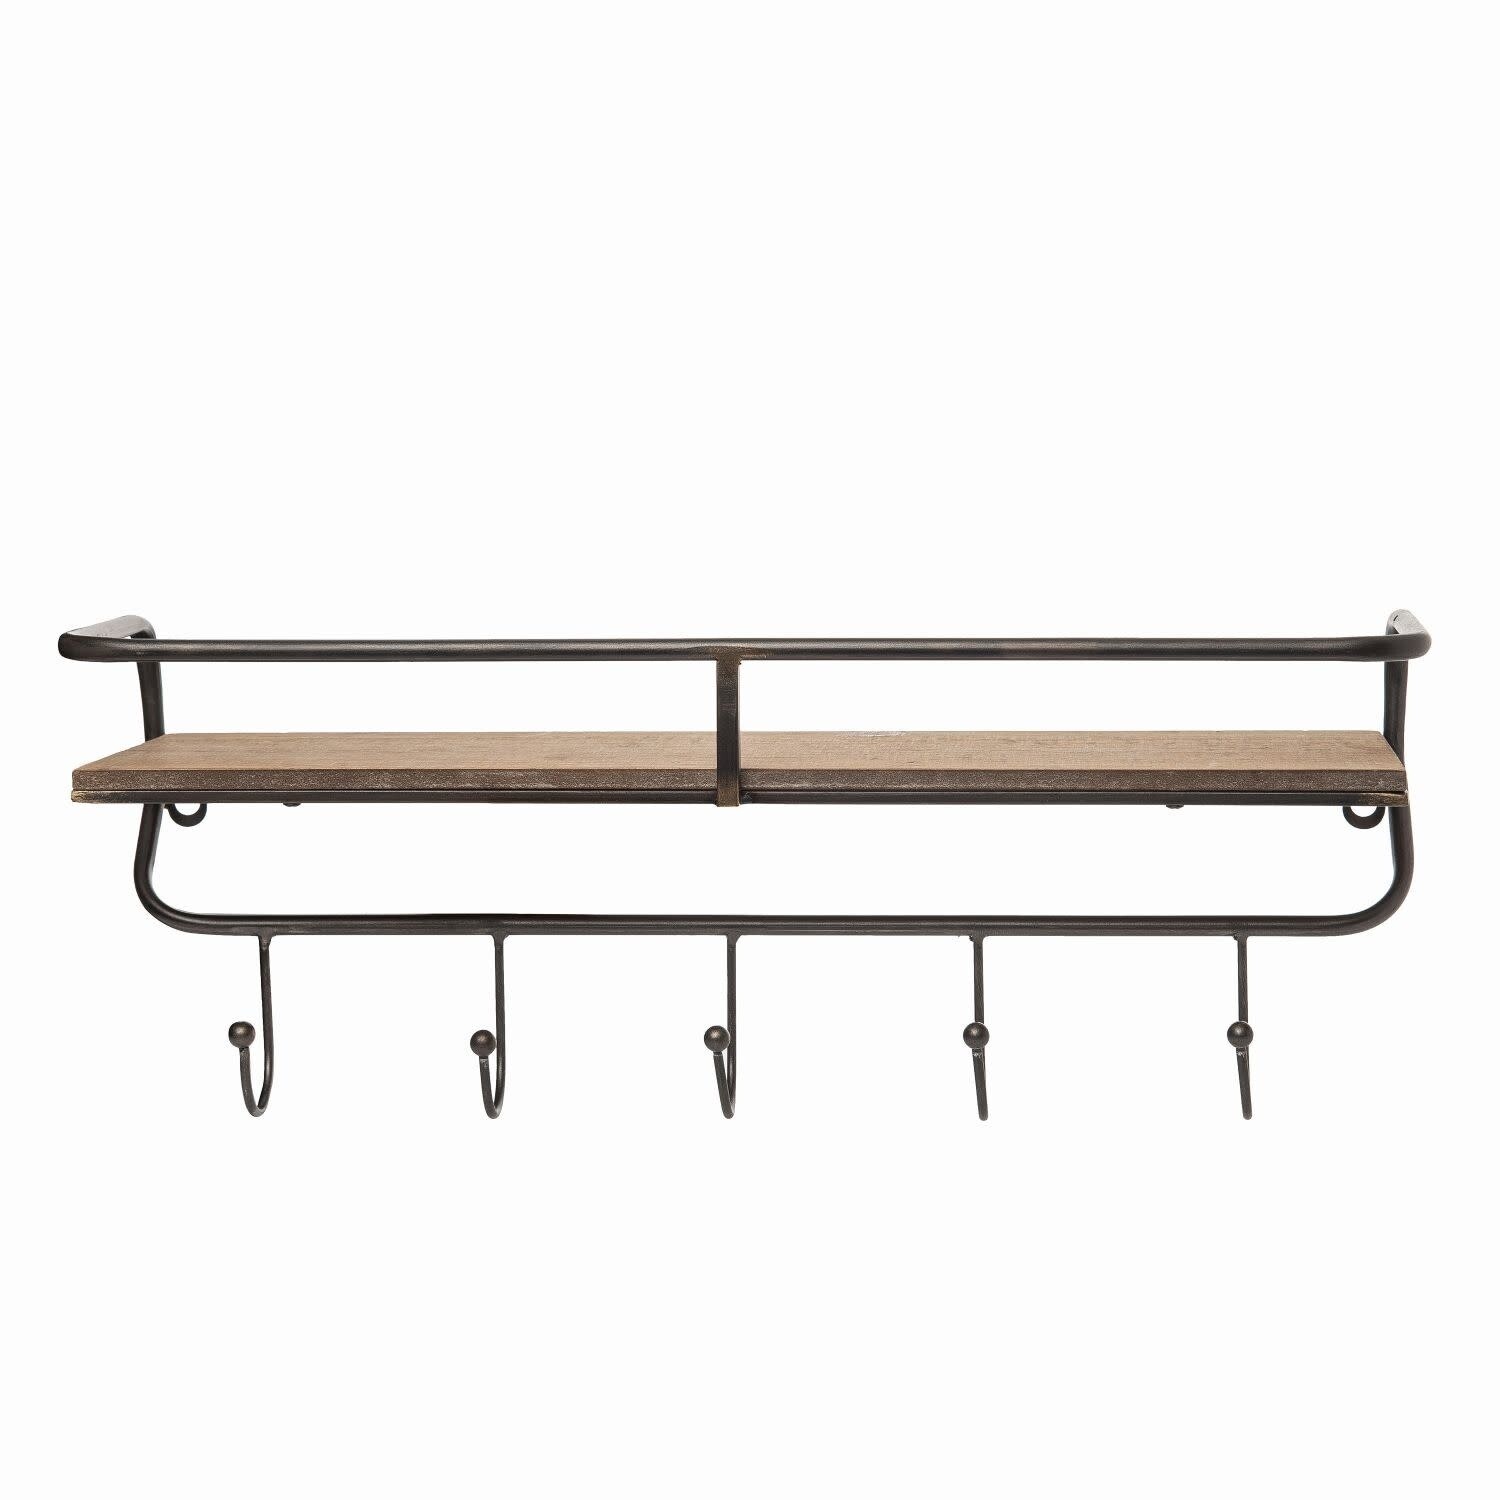 WOODEN & METAL WALL RACK - SMALL